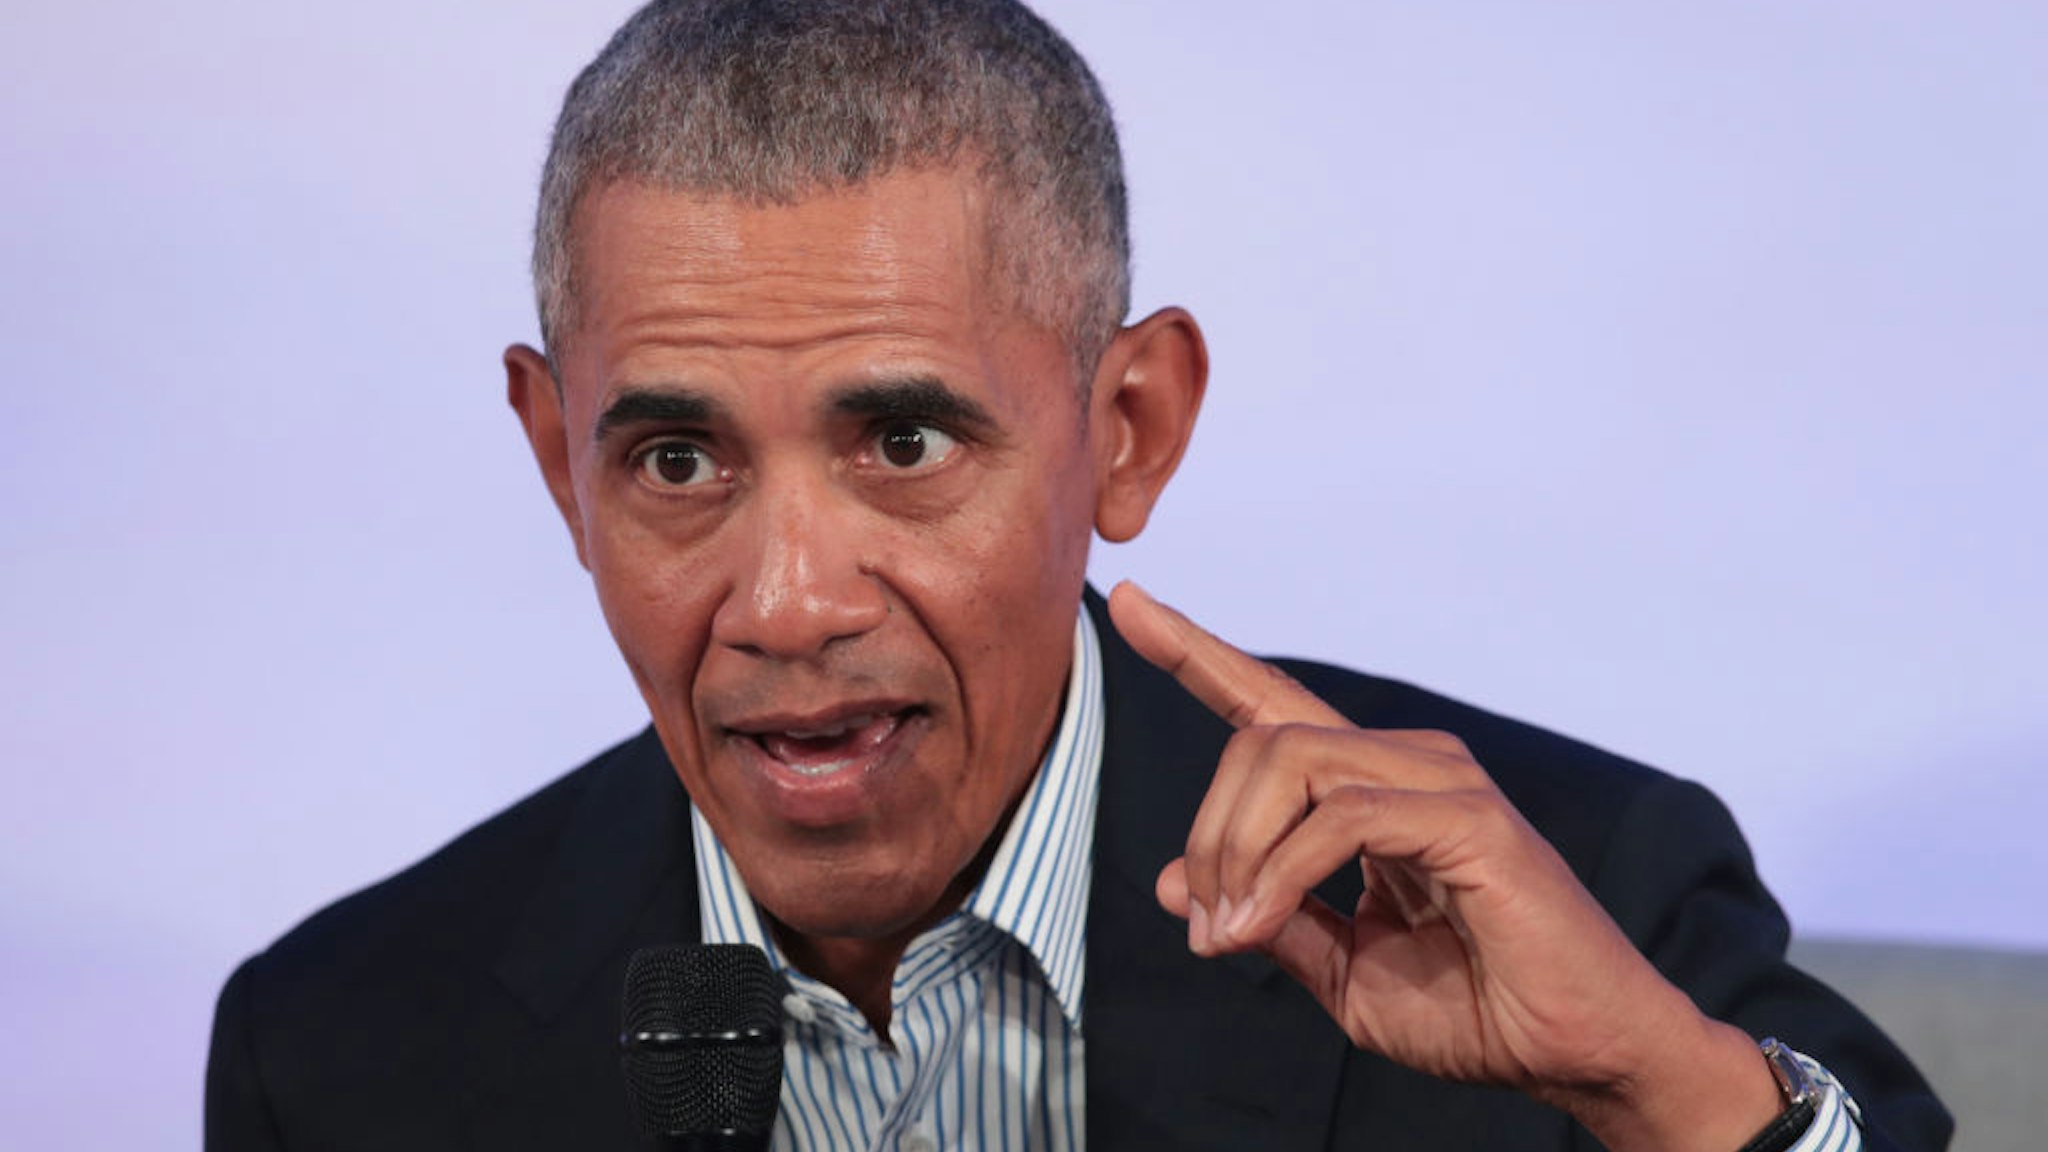 Former U.S. President Barack Obama speaks to guests at the Obama Foundation Summit on the campus of the Illinois Institute of Technology on October 29, 2019 in Chicago, Illinois.